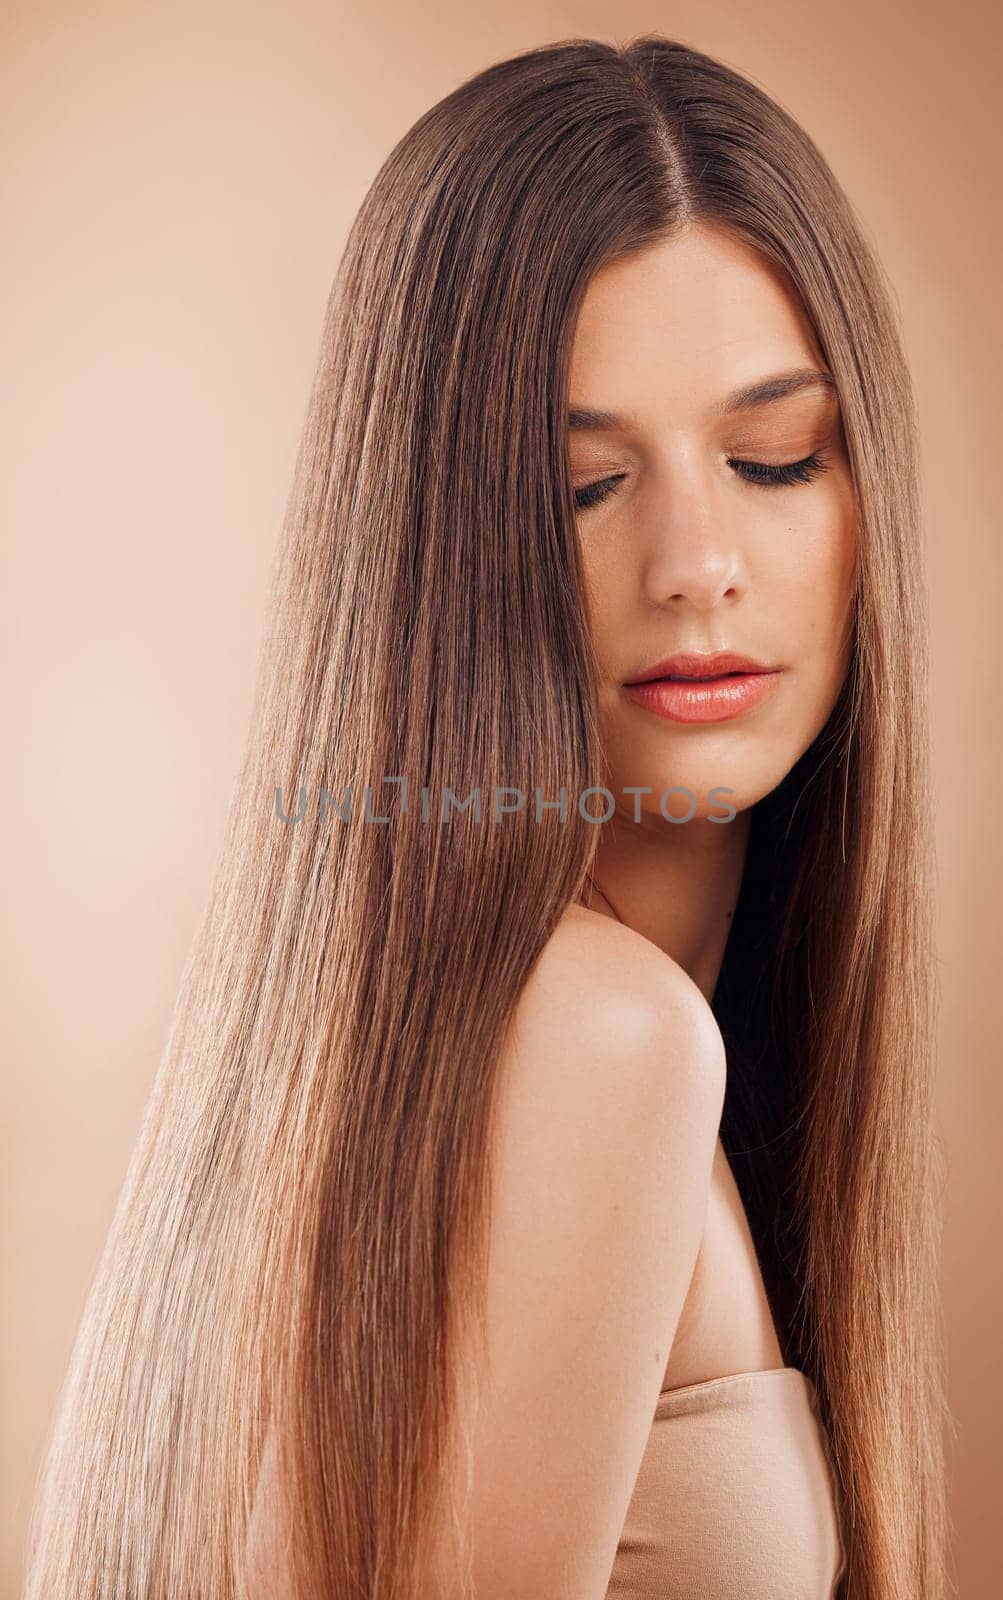 Hair care, beauty and woman on studio background for cosmetics, makeup and shampoo for shine, growth and strong texture hairstyle. Face of brunette posing for hairdresser or luxury salon product.